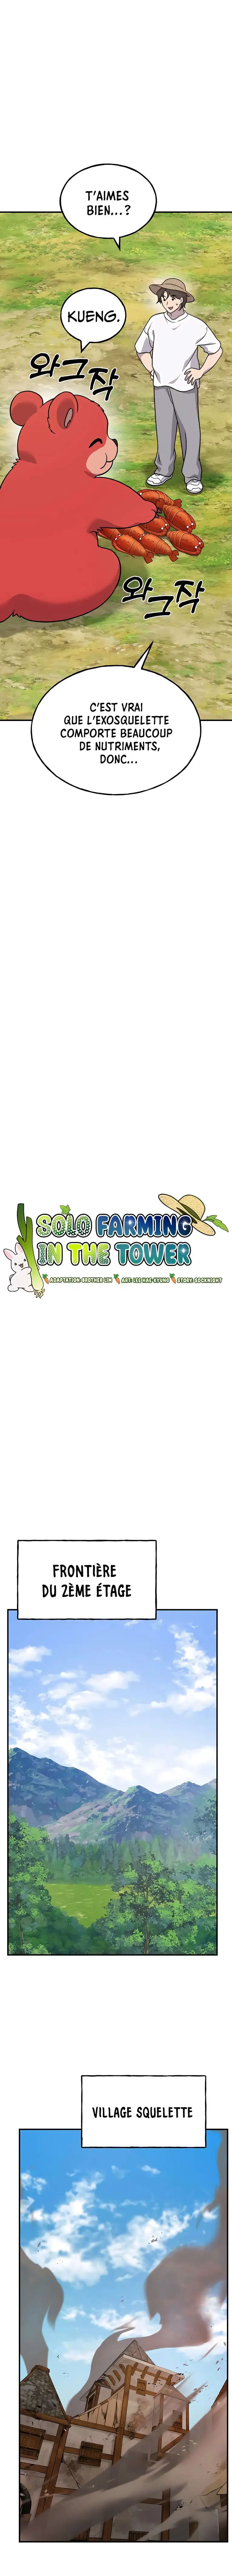 Solo Farming In The Towerimage12